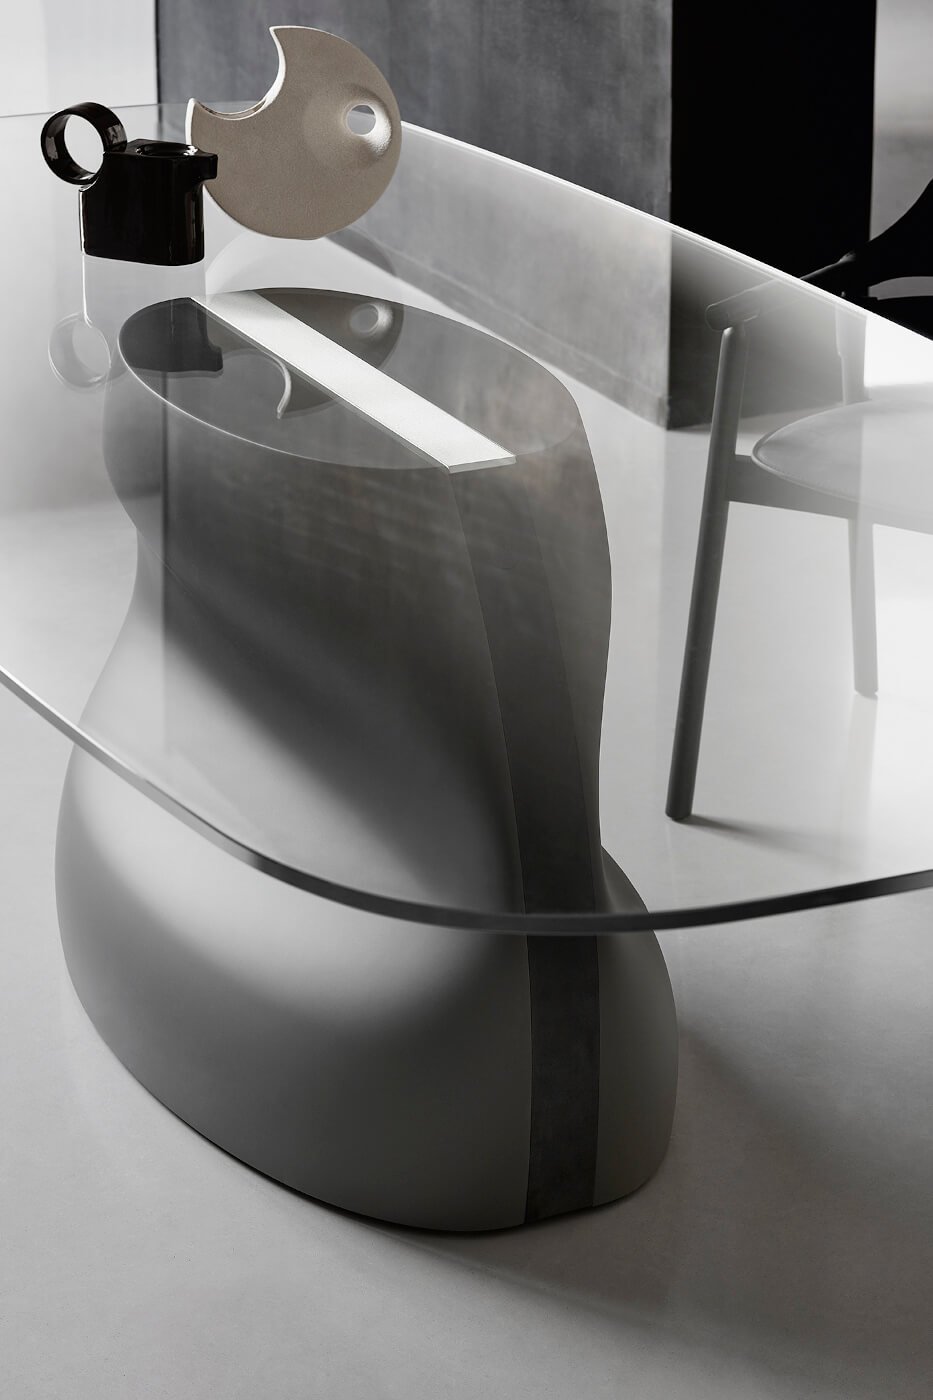 Gran Sasso Dining Table from Midj, designed by Andrea Lucatello